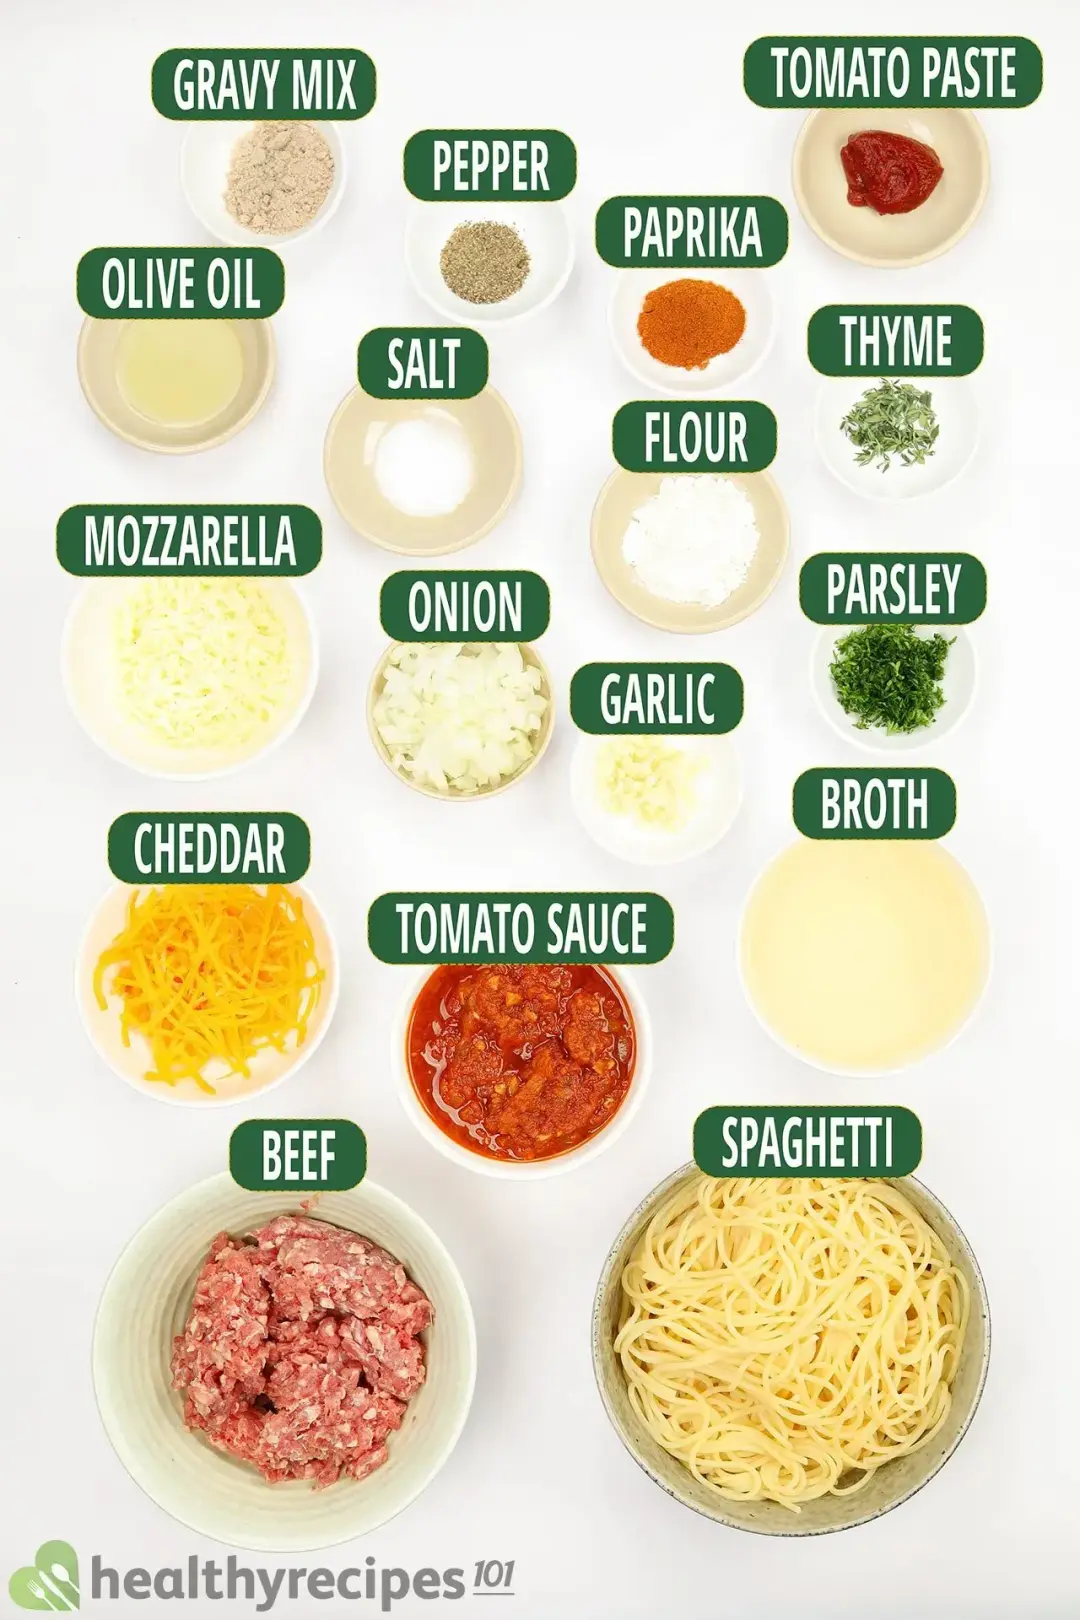 Ingredients for Baked Spaghetti